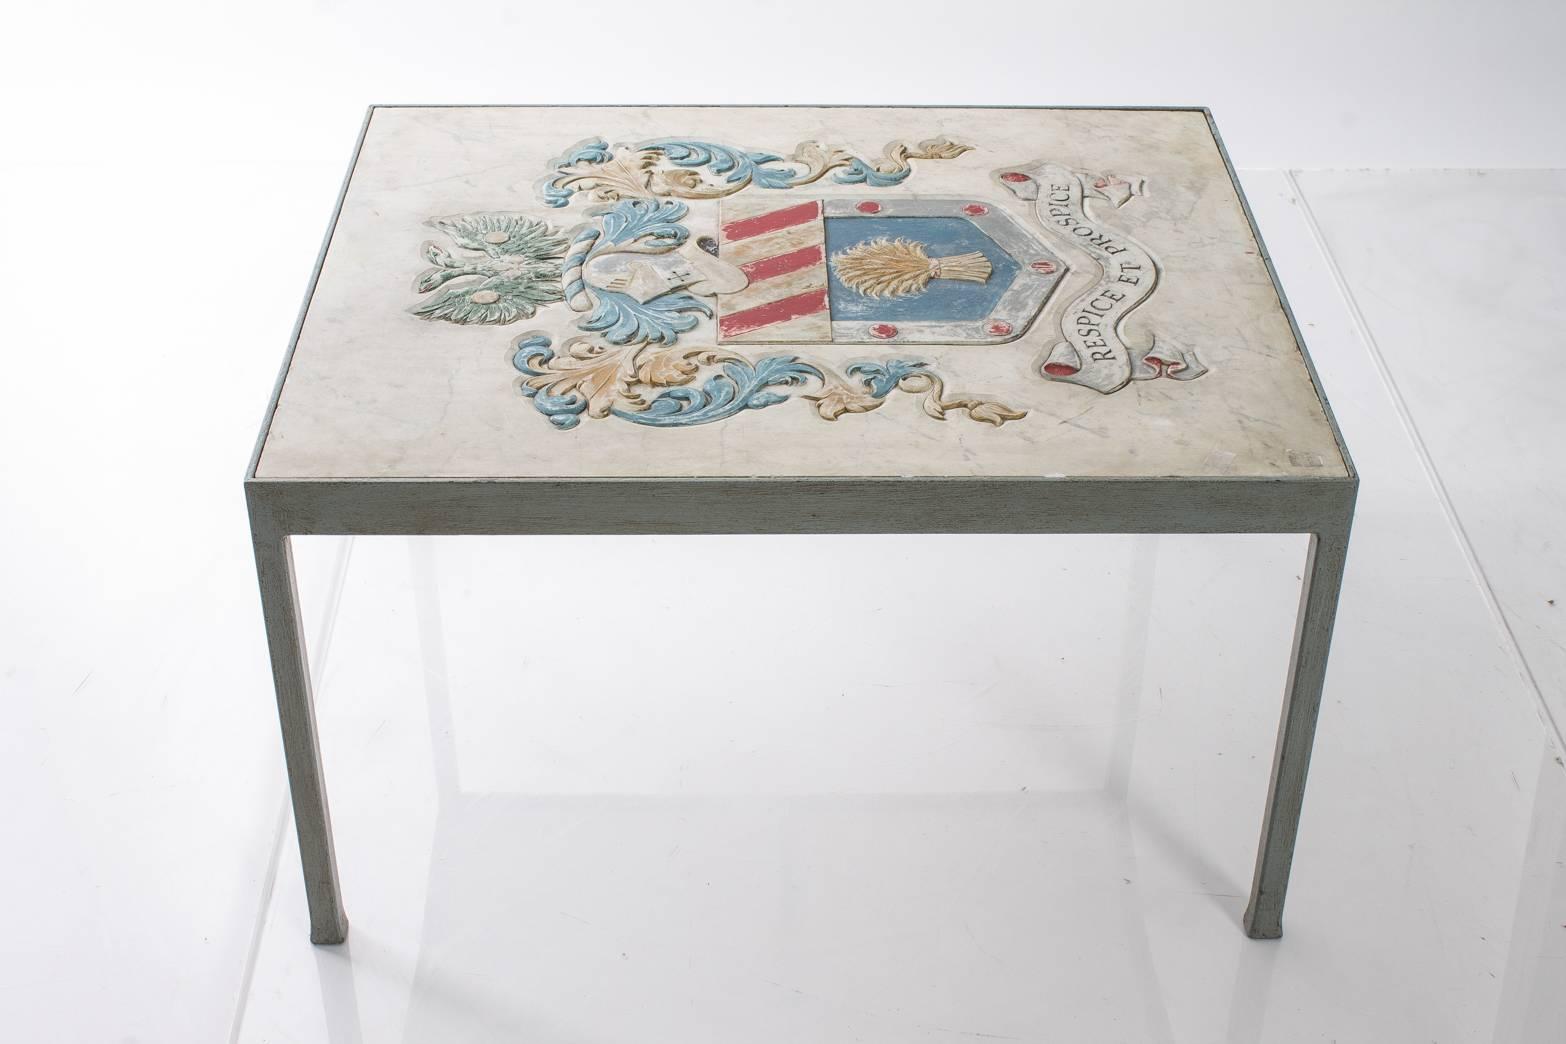 Table with a carved marble plaque top depicting a heraldic crest. The plaque had previously hung over a fireplace in Sussex, circa 1870.